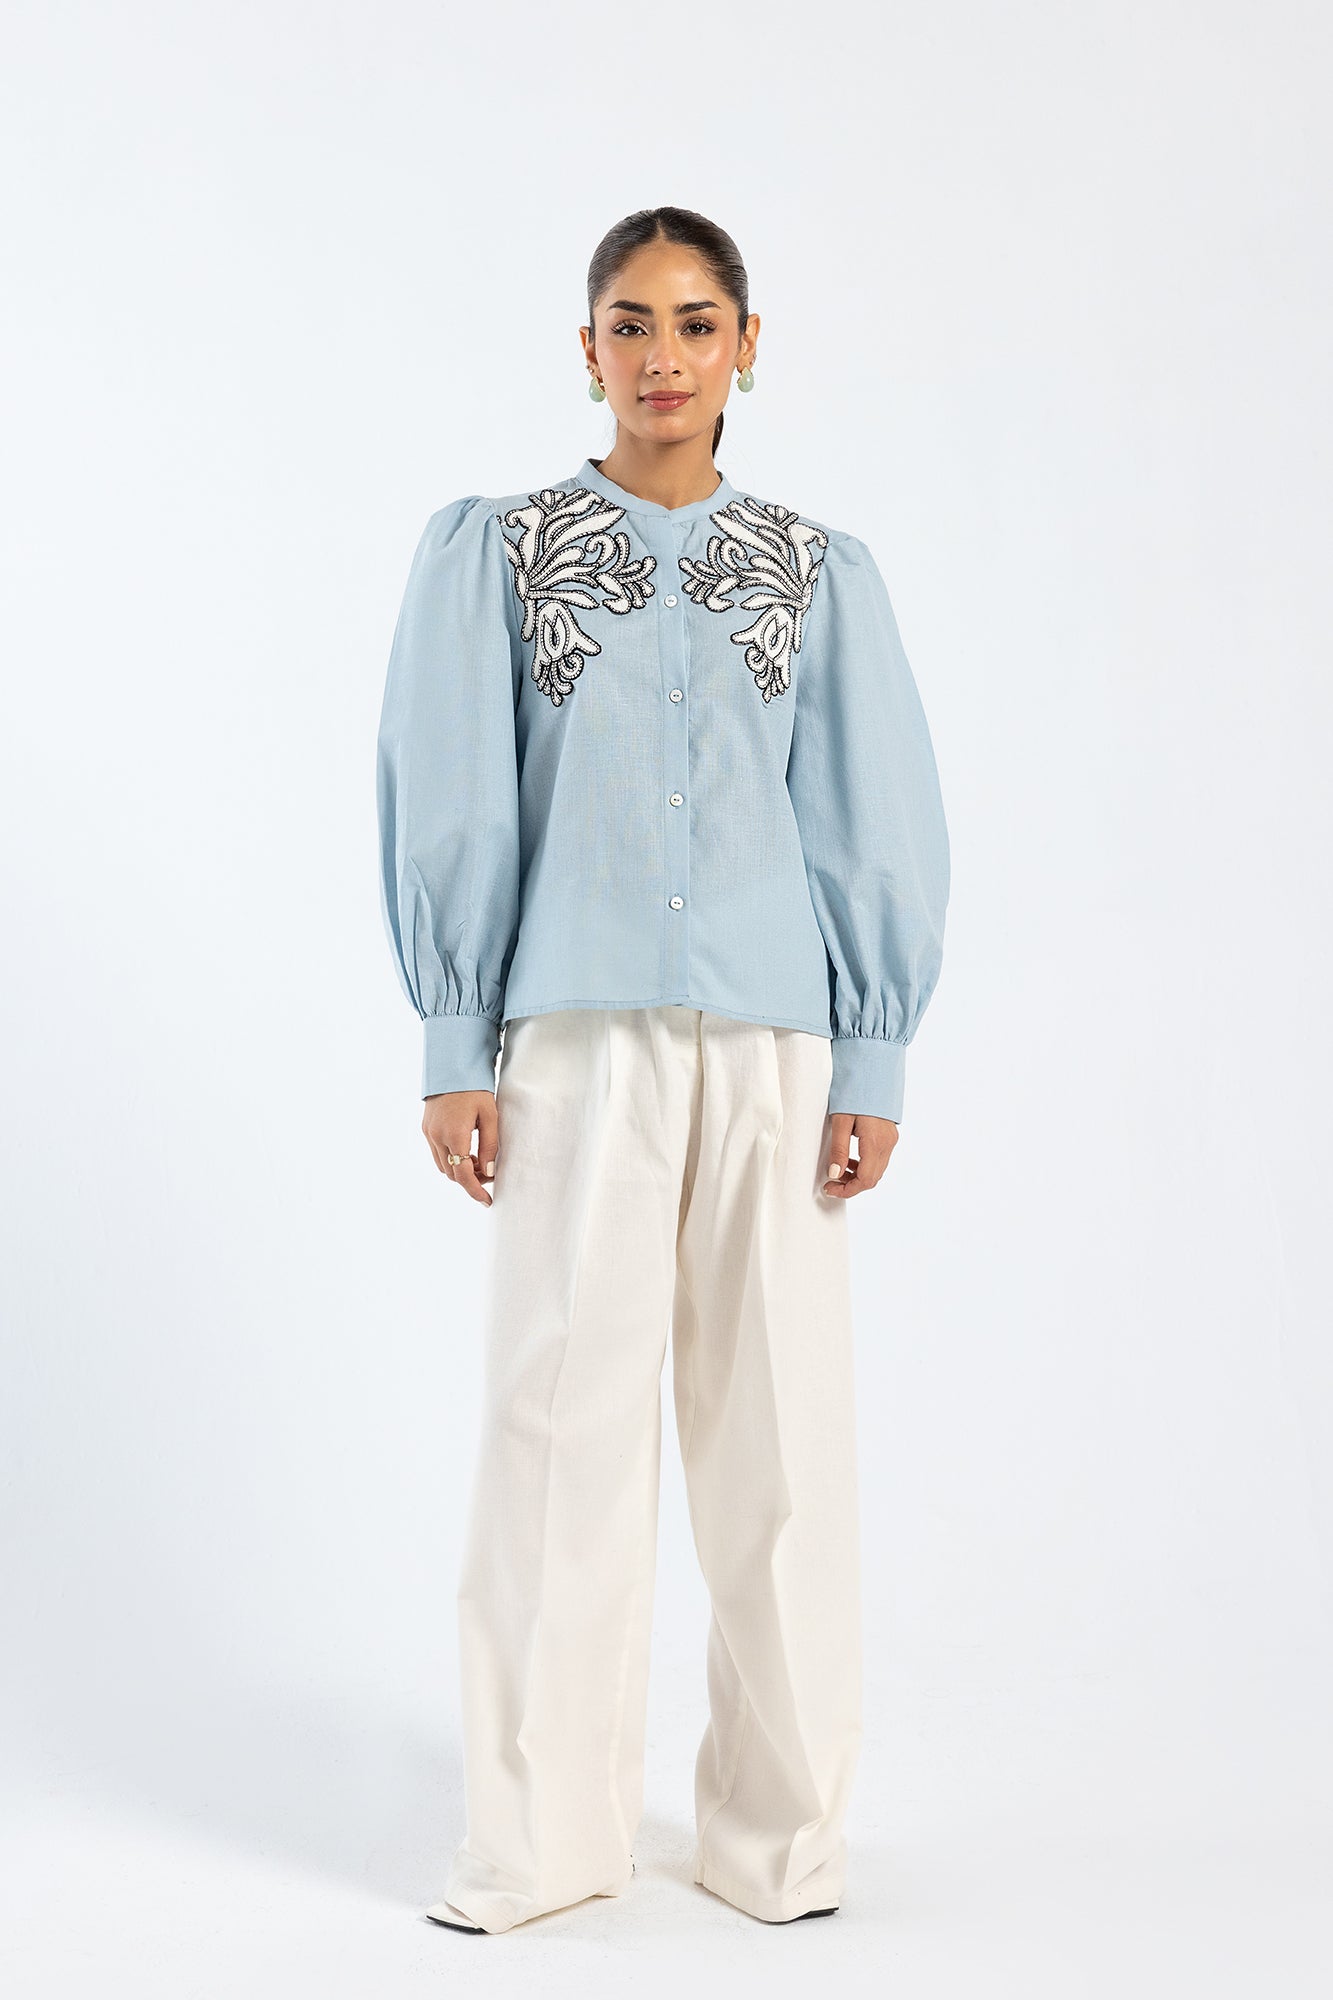 EMBROIDERED TOP (E1781/108/616)